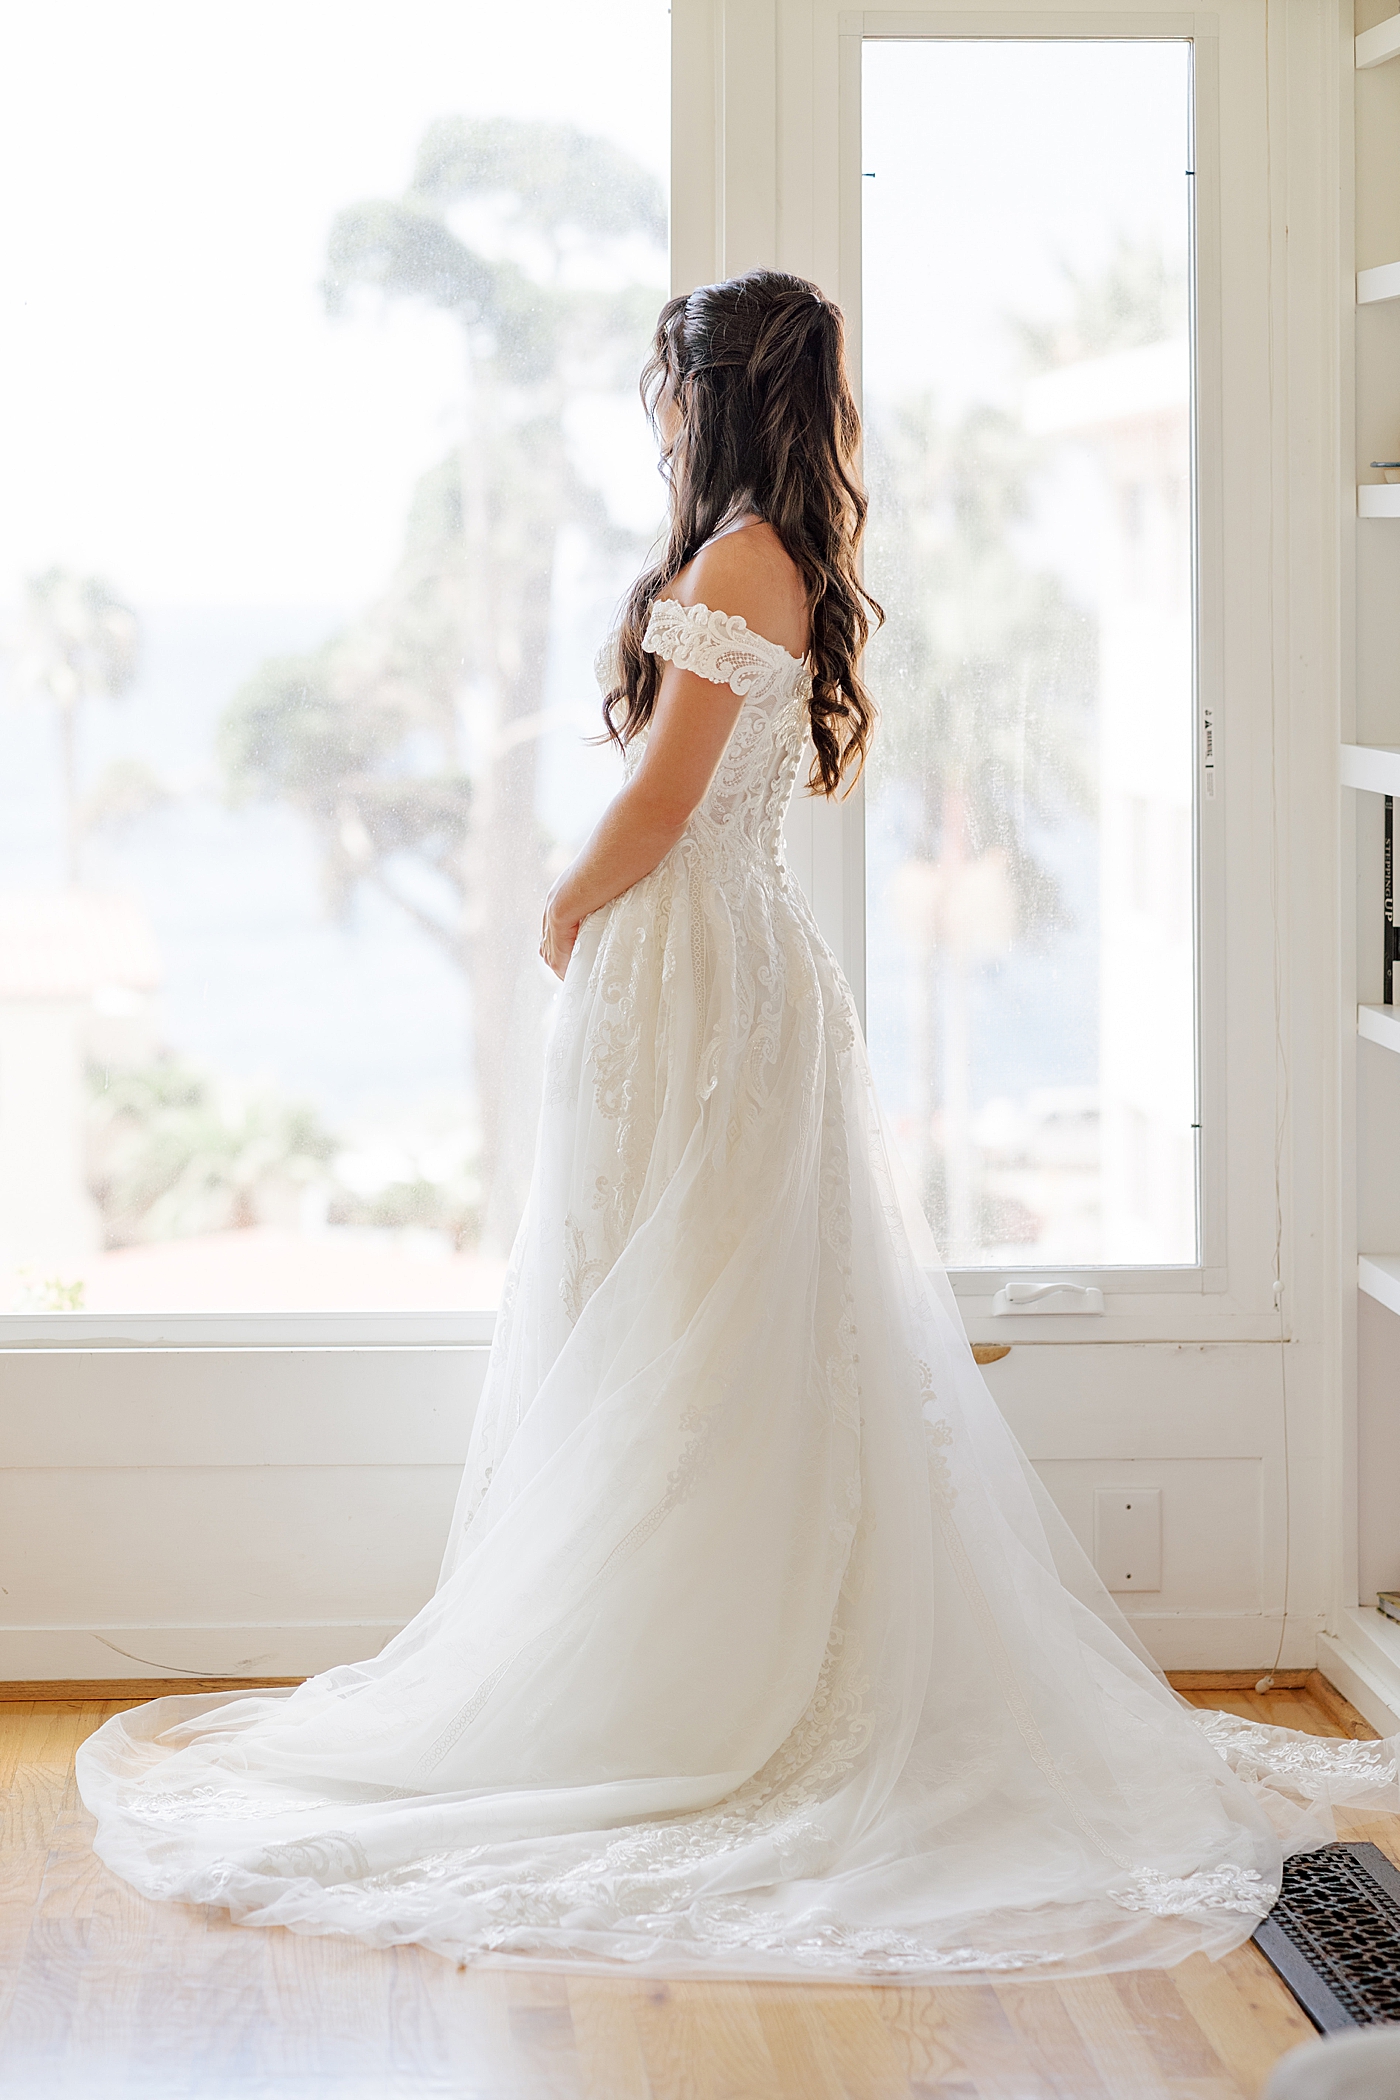 Full length image of a bride looking away from the camera and out a large, glass picture window | Image by Hope Helmuth Photography